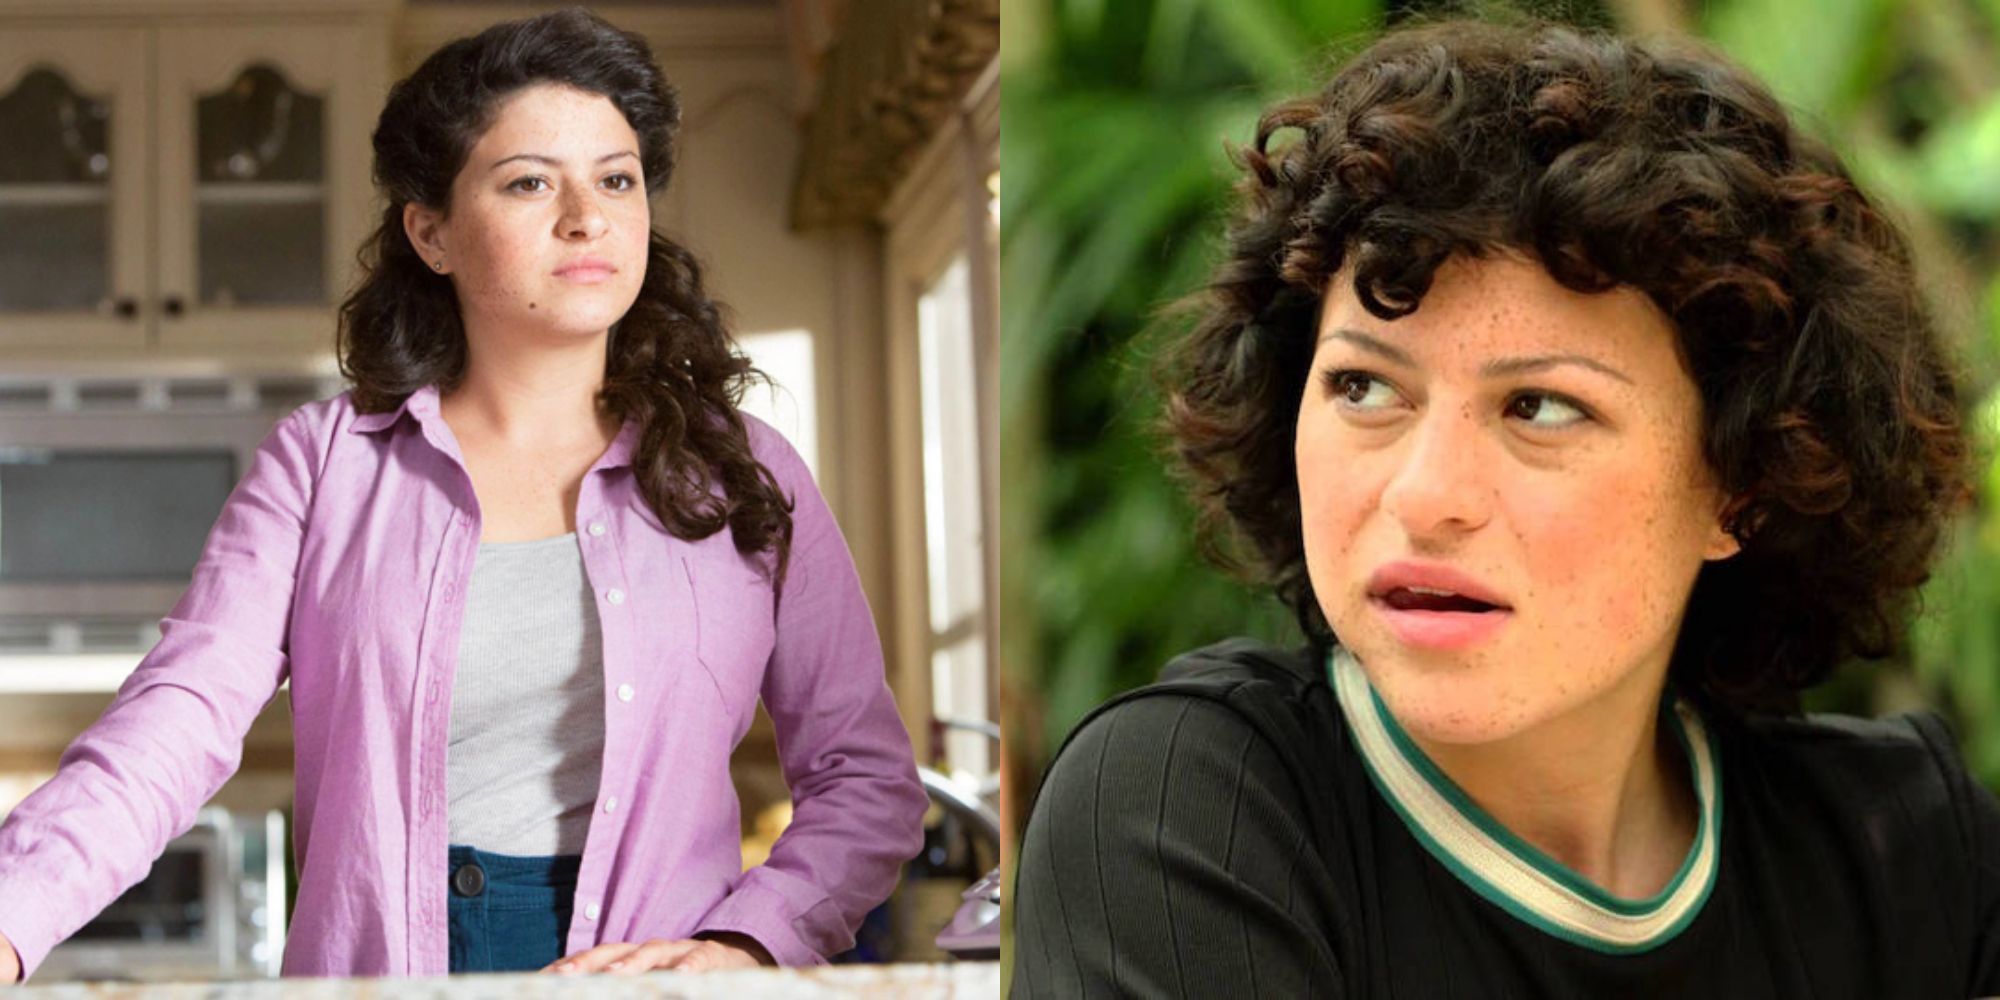 Split image showing Alia Shawkat in Arrested Development and Search Party.